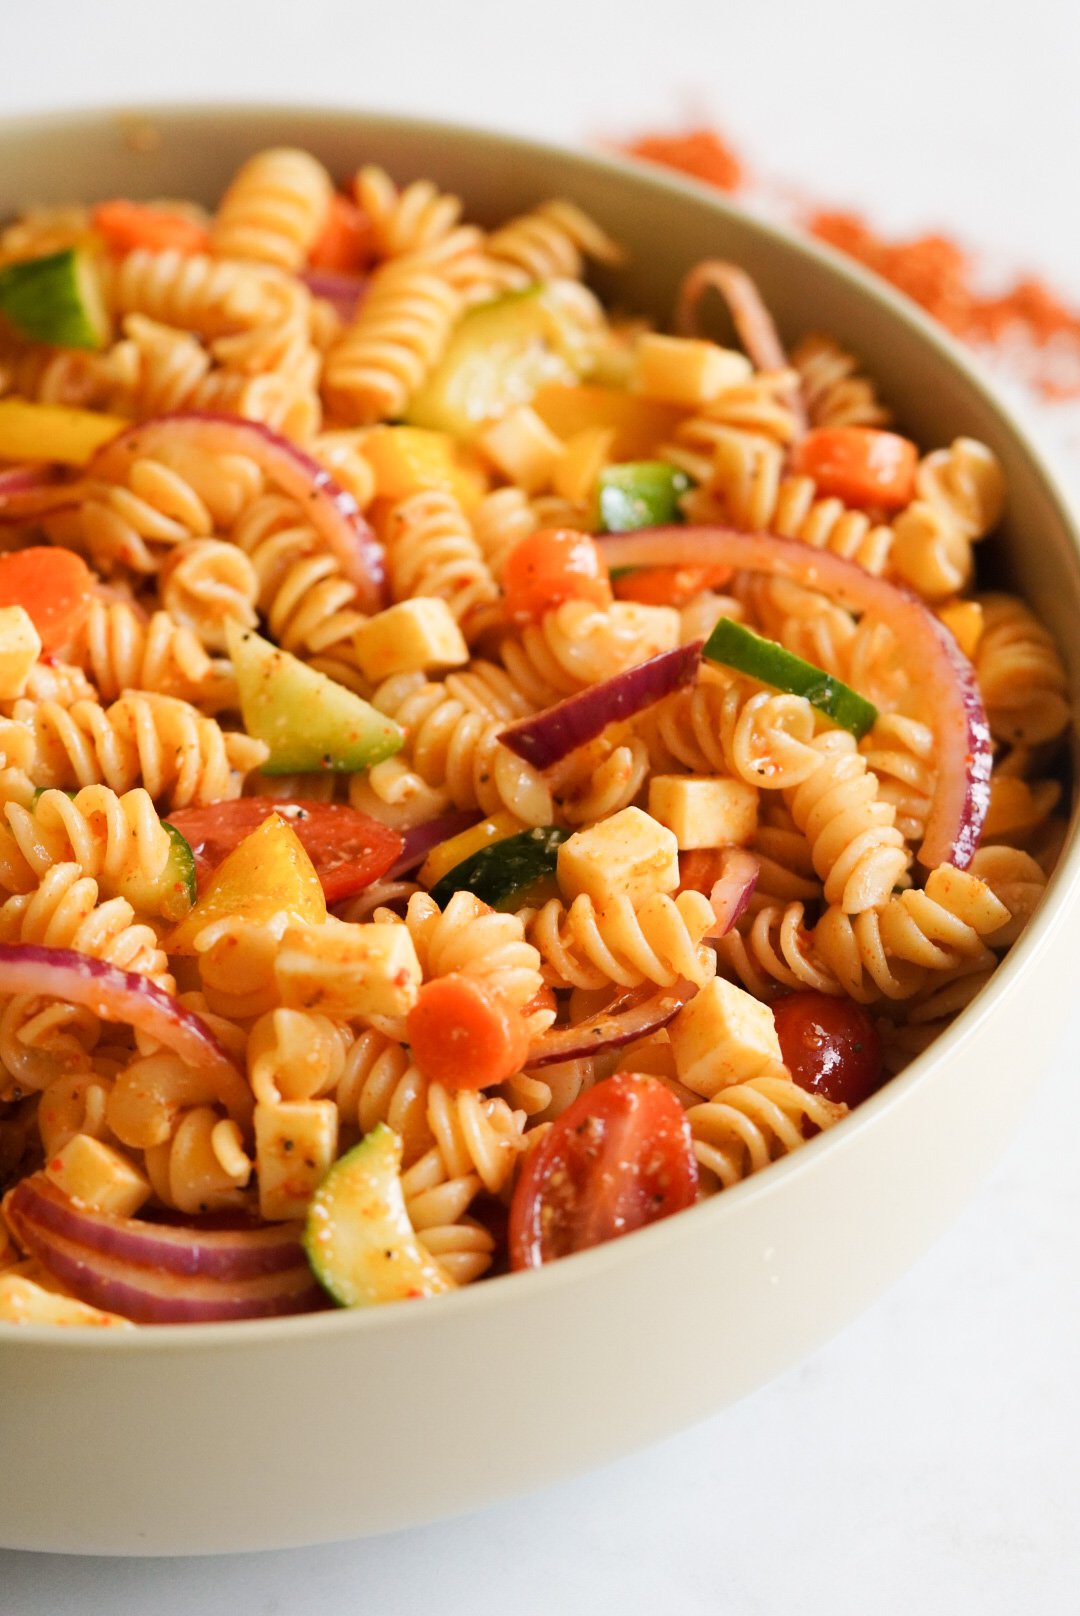 Salad Supreme Seasoning: Elevate Your Pasta Salad with Flavorful Delight